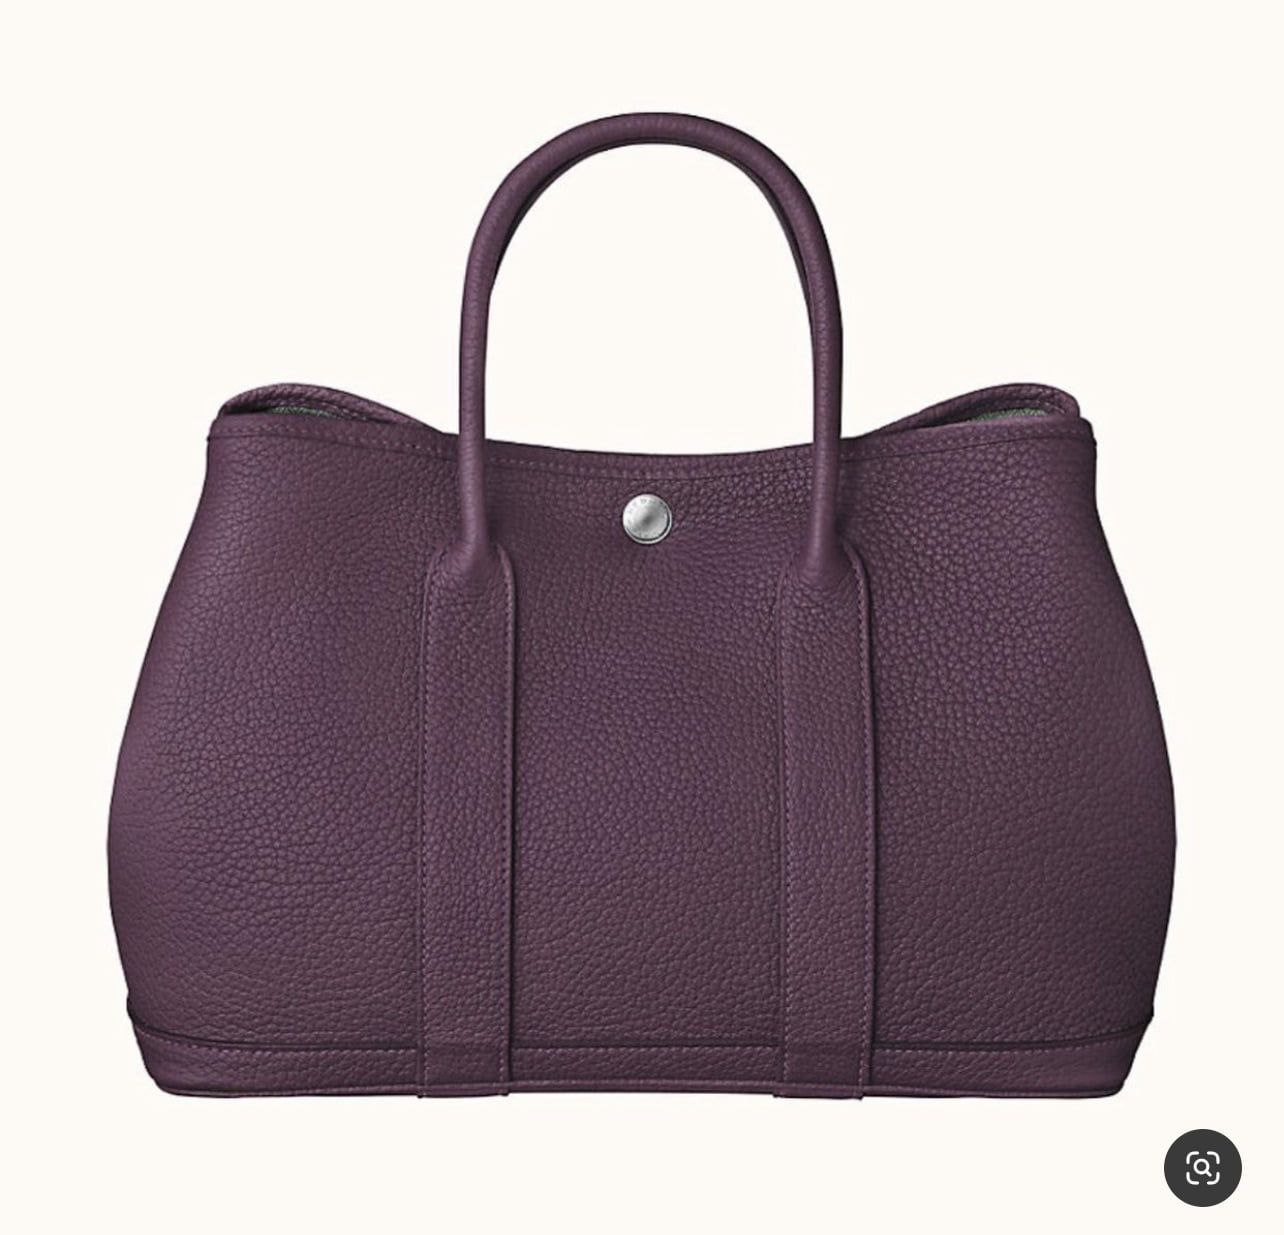 Hermès Chai is the Favorite Color for 2022